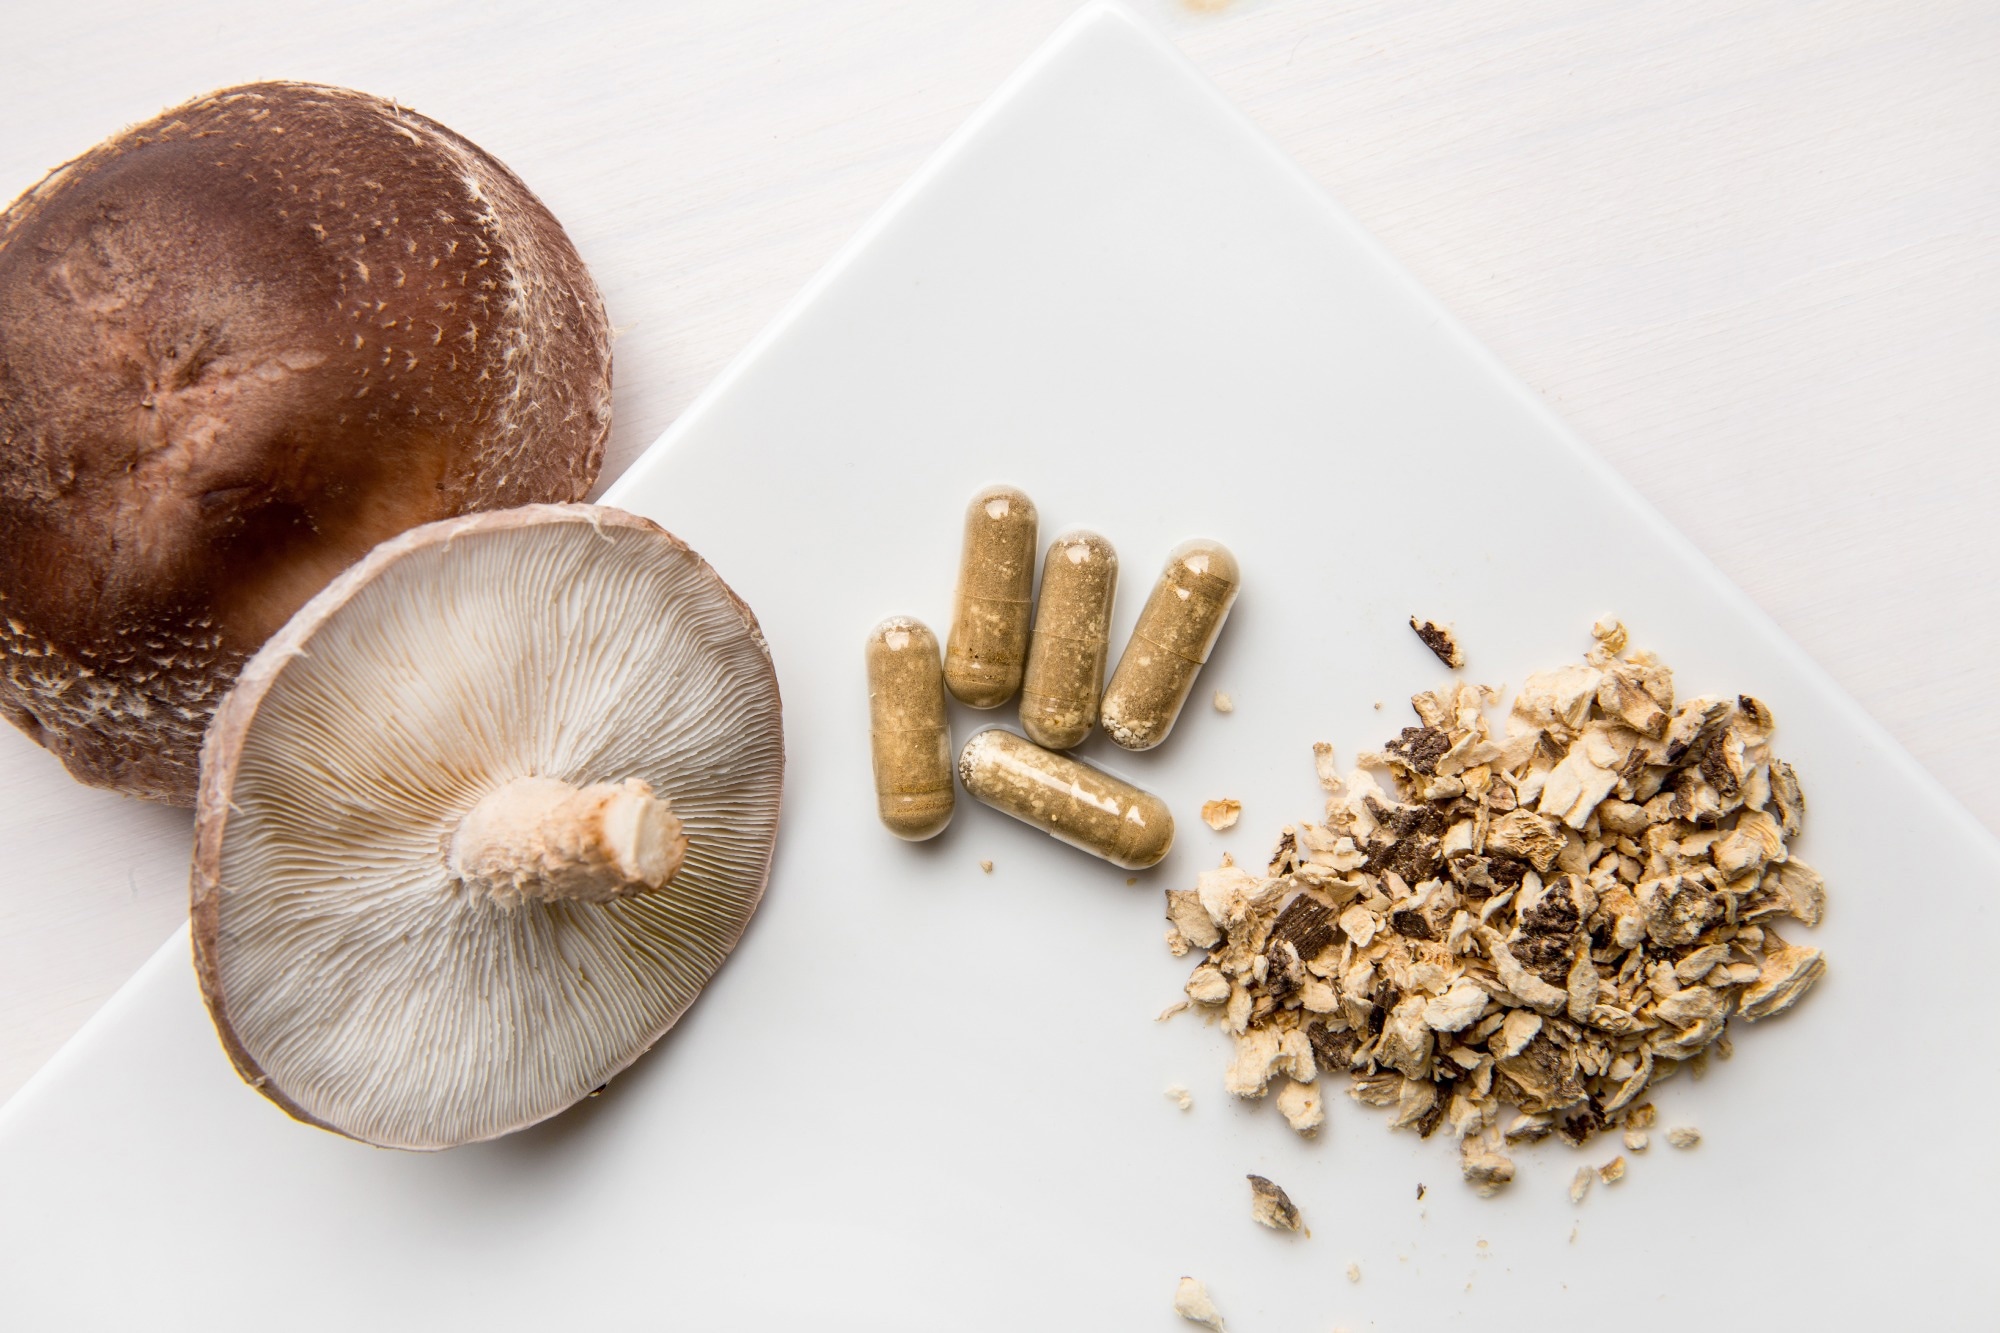 Study: Antioxidant Compounds from Edible Mushrooms as Potential Candidates for Treating Age-Related Neurodegenerative Diseases. Image Credit: FotoHelin/Shutterstock.com